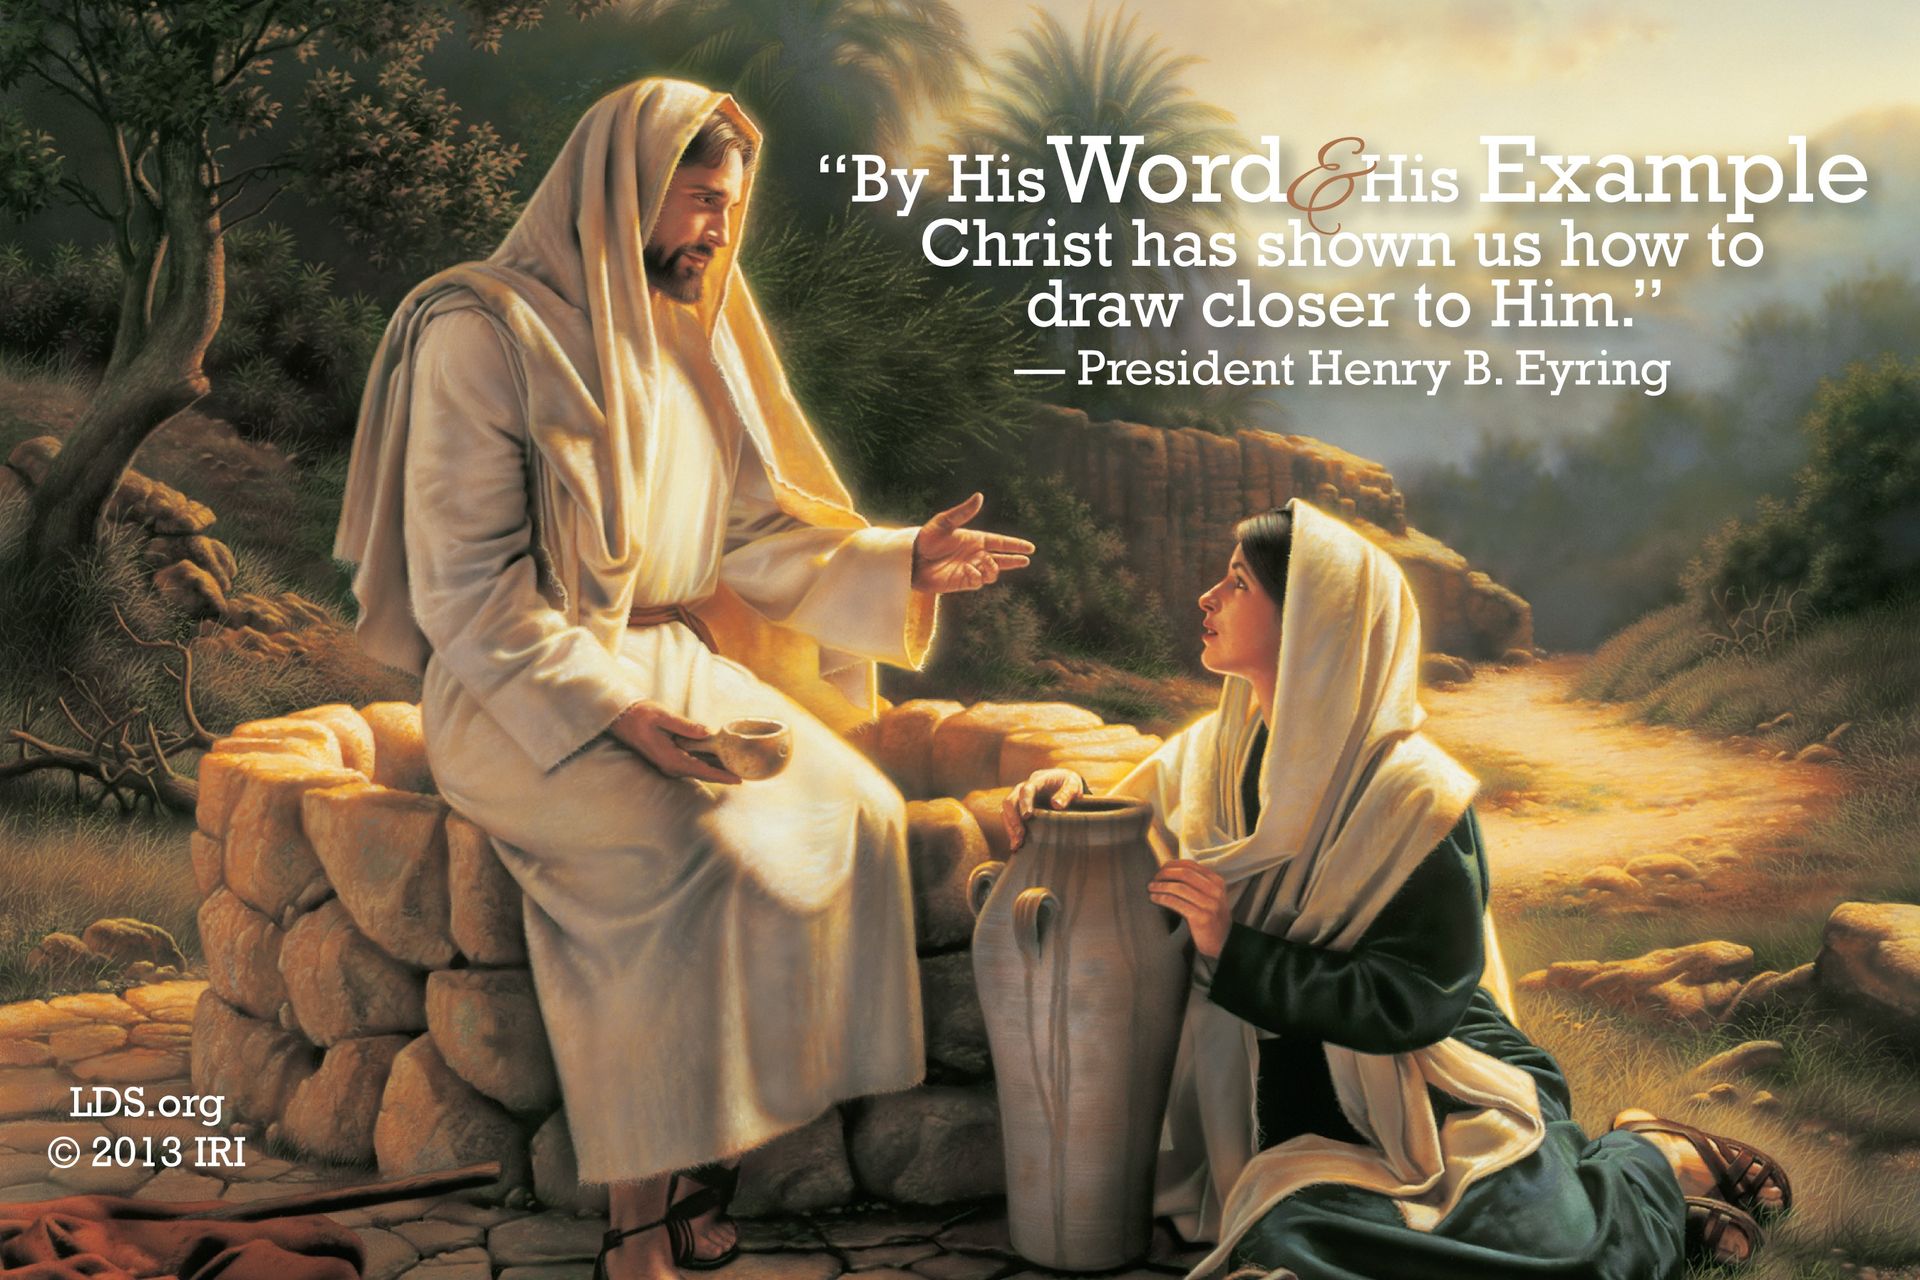 “By His word and His example, Christ has shown us how to draw closer to Him.”—President Henry B. Eyring, “Come unto Me” © undefined ipCode 1.